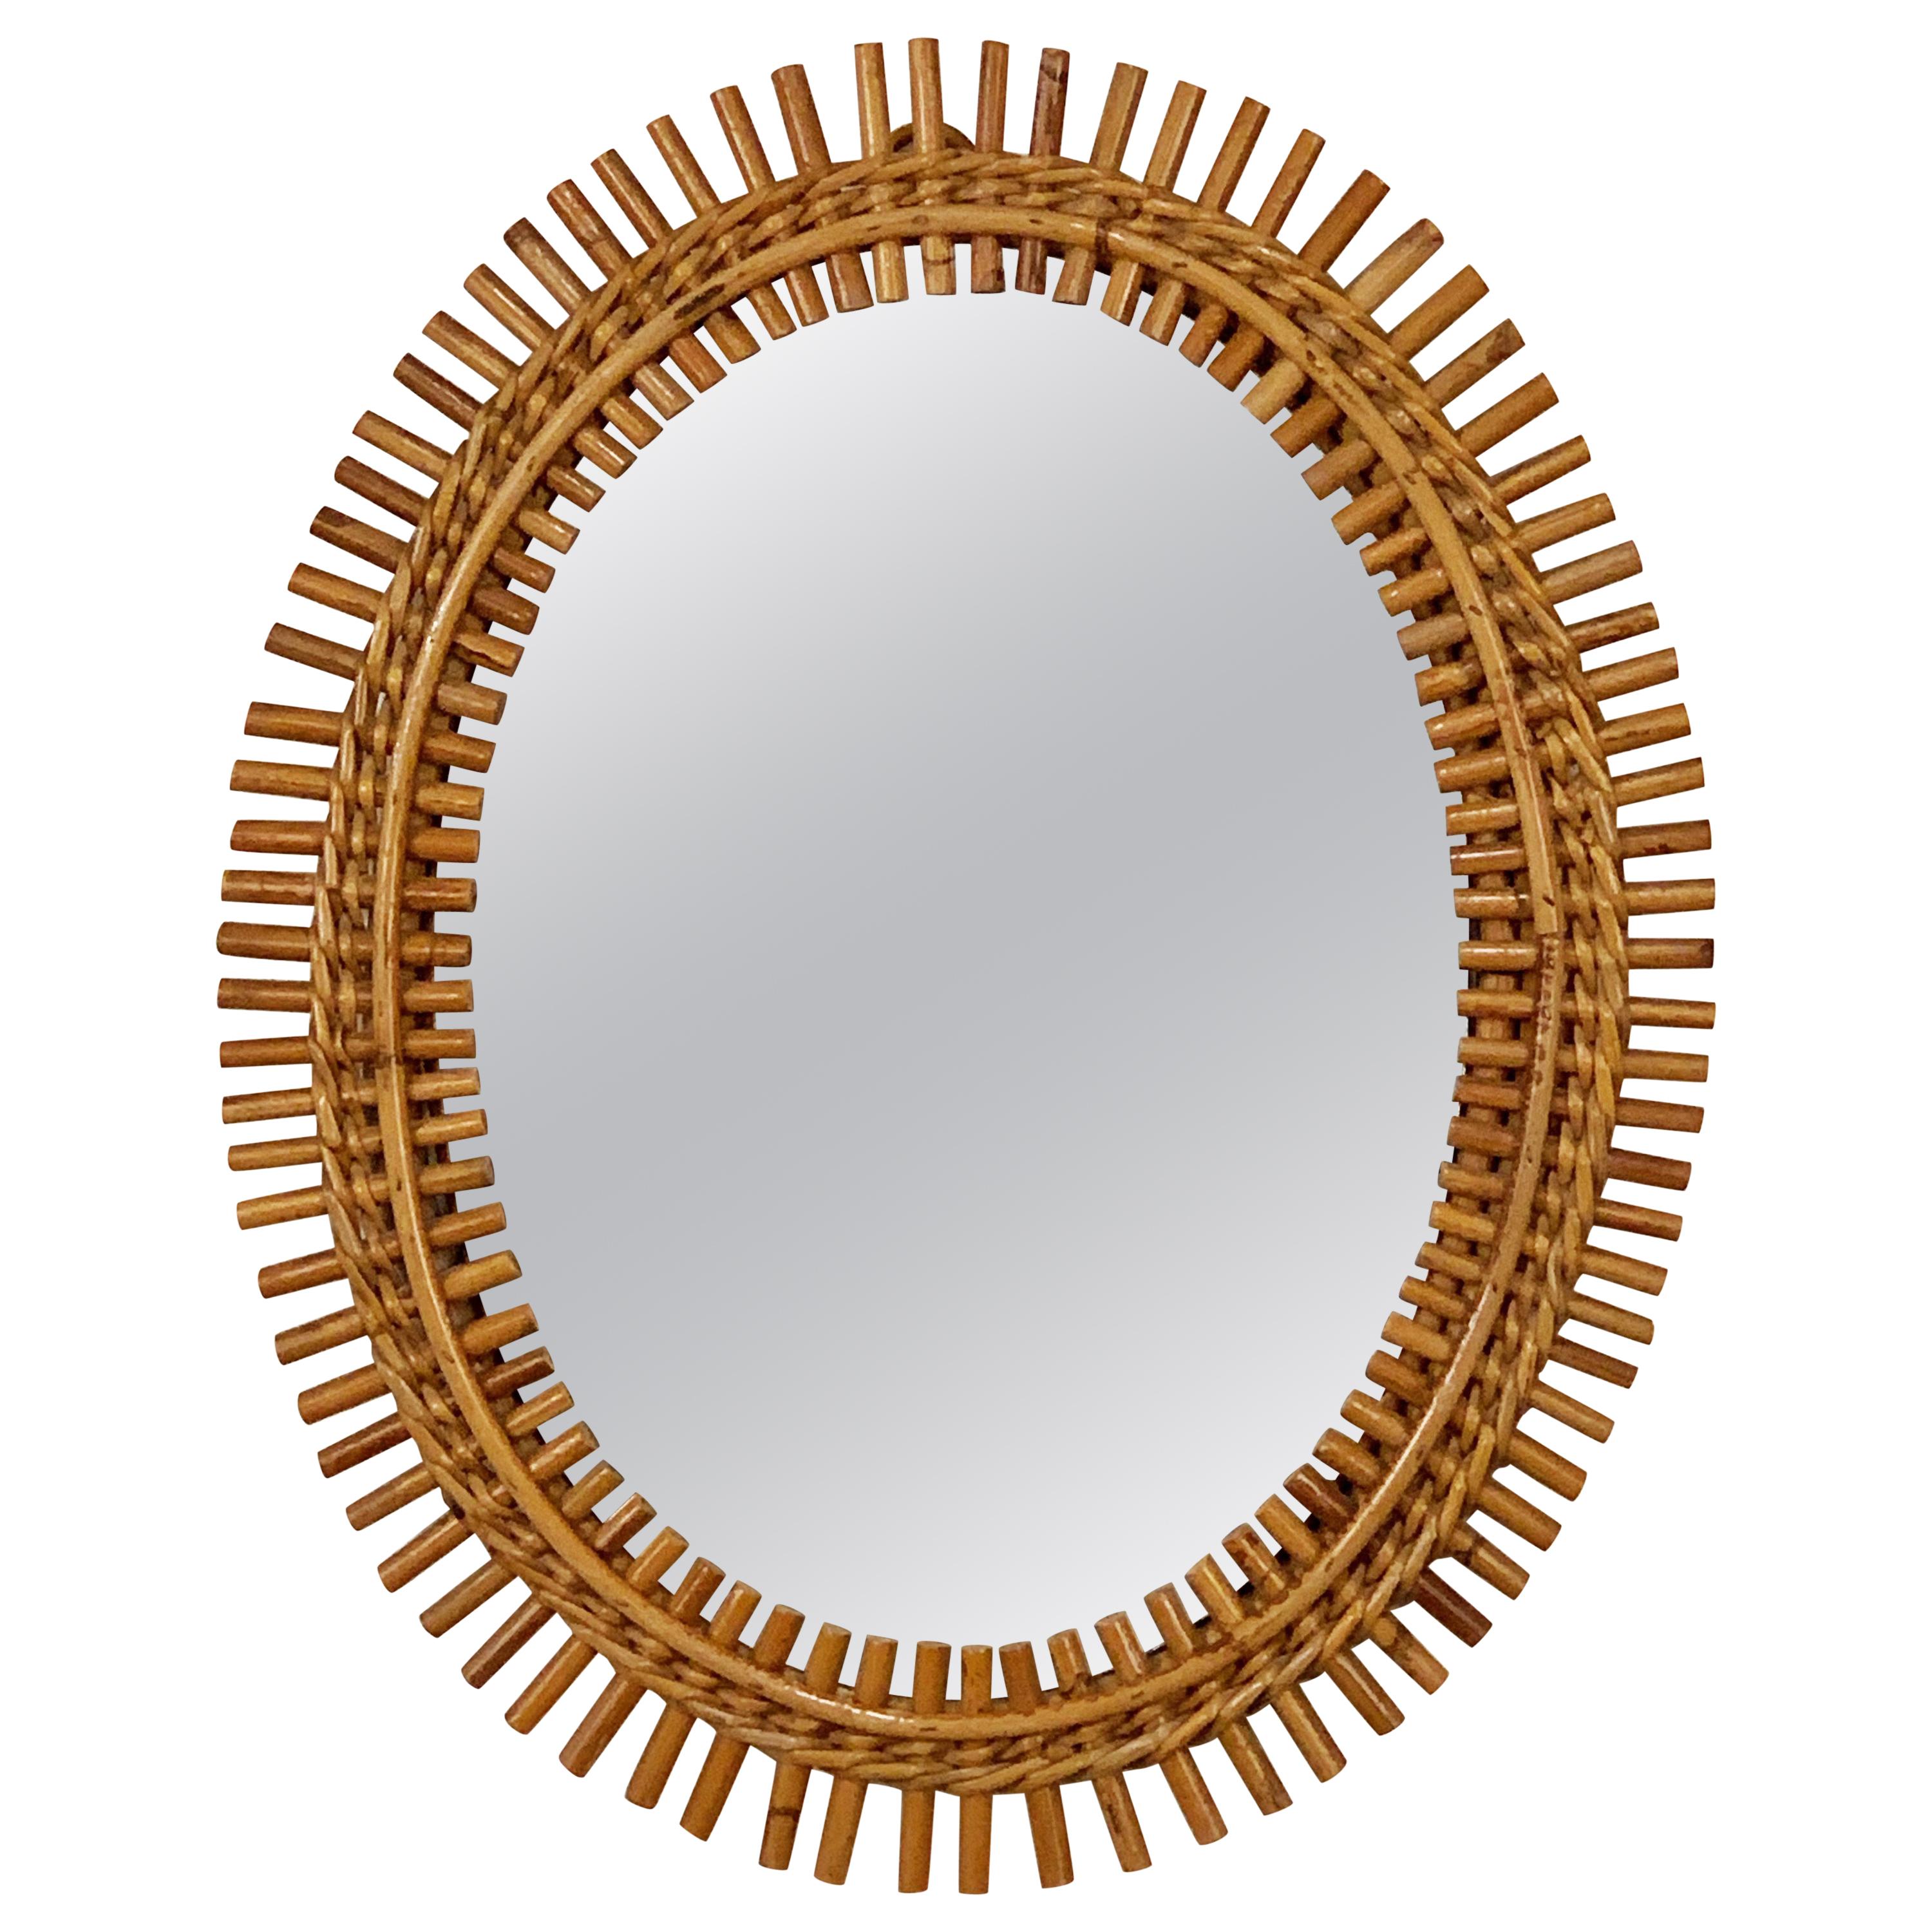 French Riviera Oval Wall Mirror in Bamboo and Rattan, 1960s Midcentury